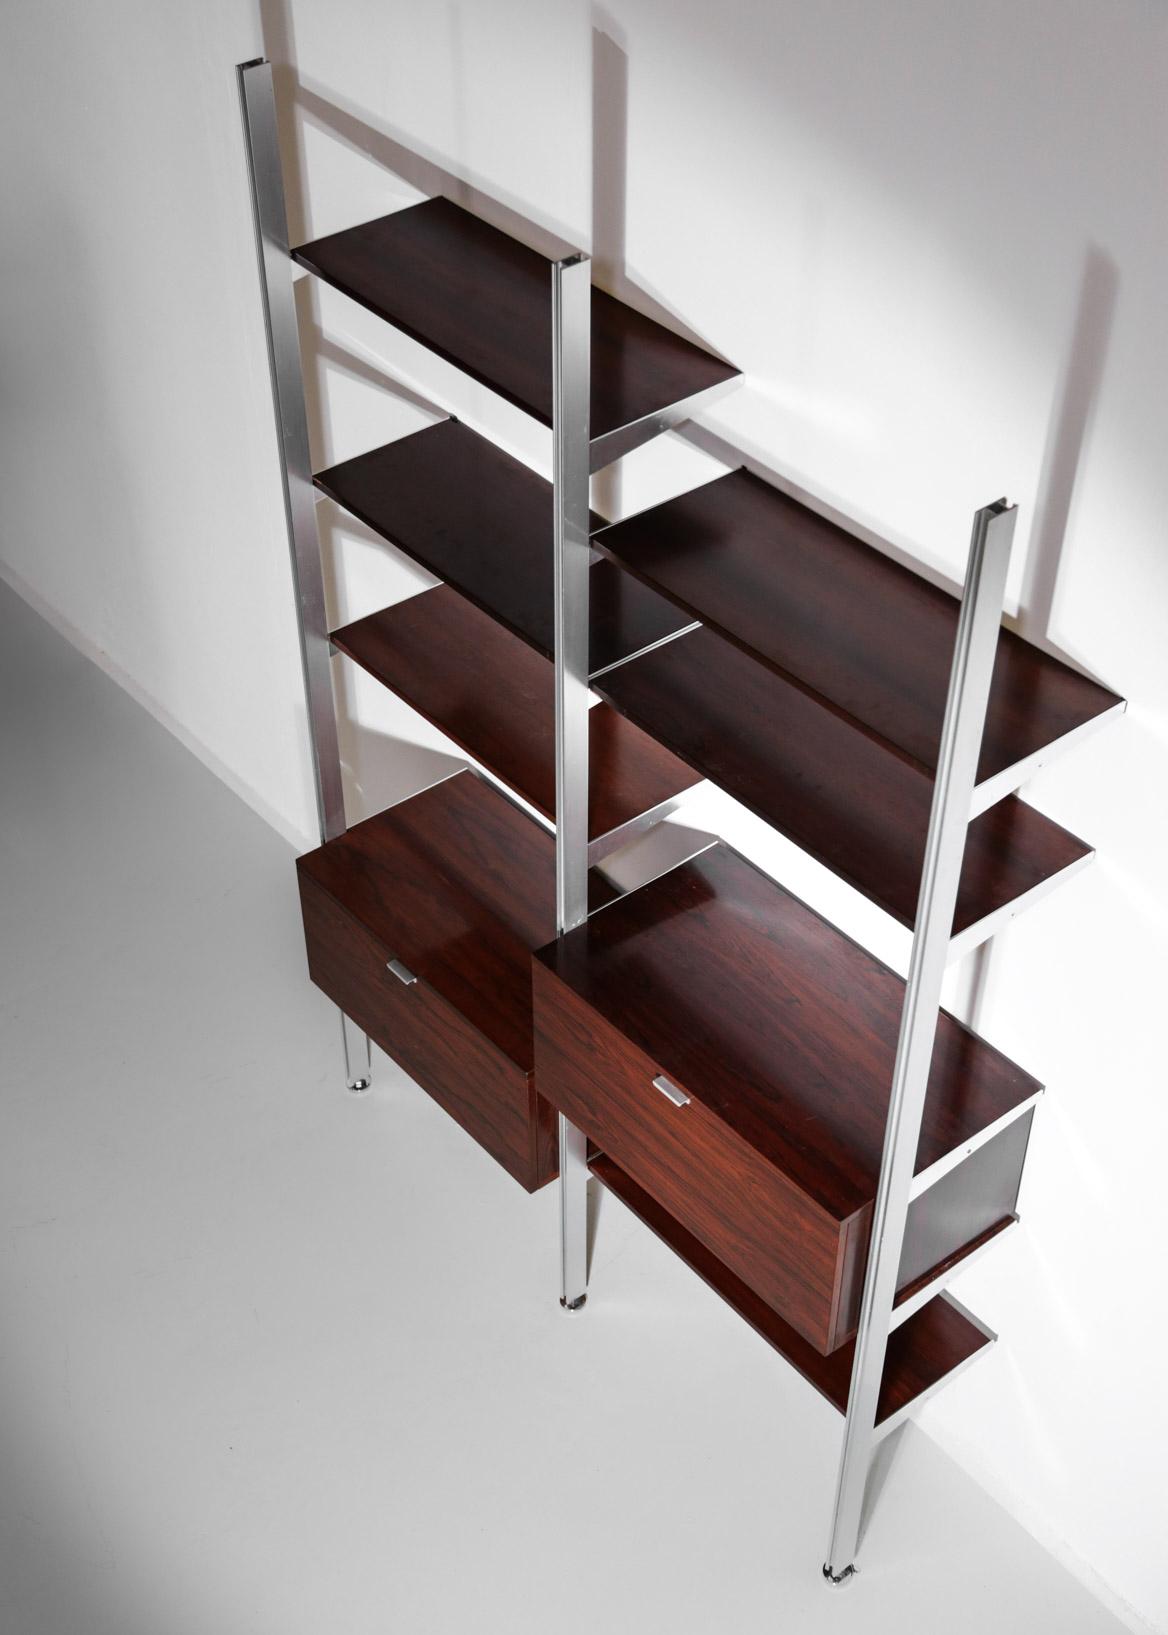 Shelving unit or bookcases by George Nelson for Mobilier International.
Shelves and boxes can be installed at your own convenience.
 